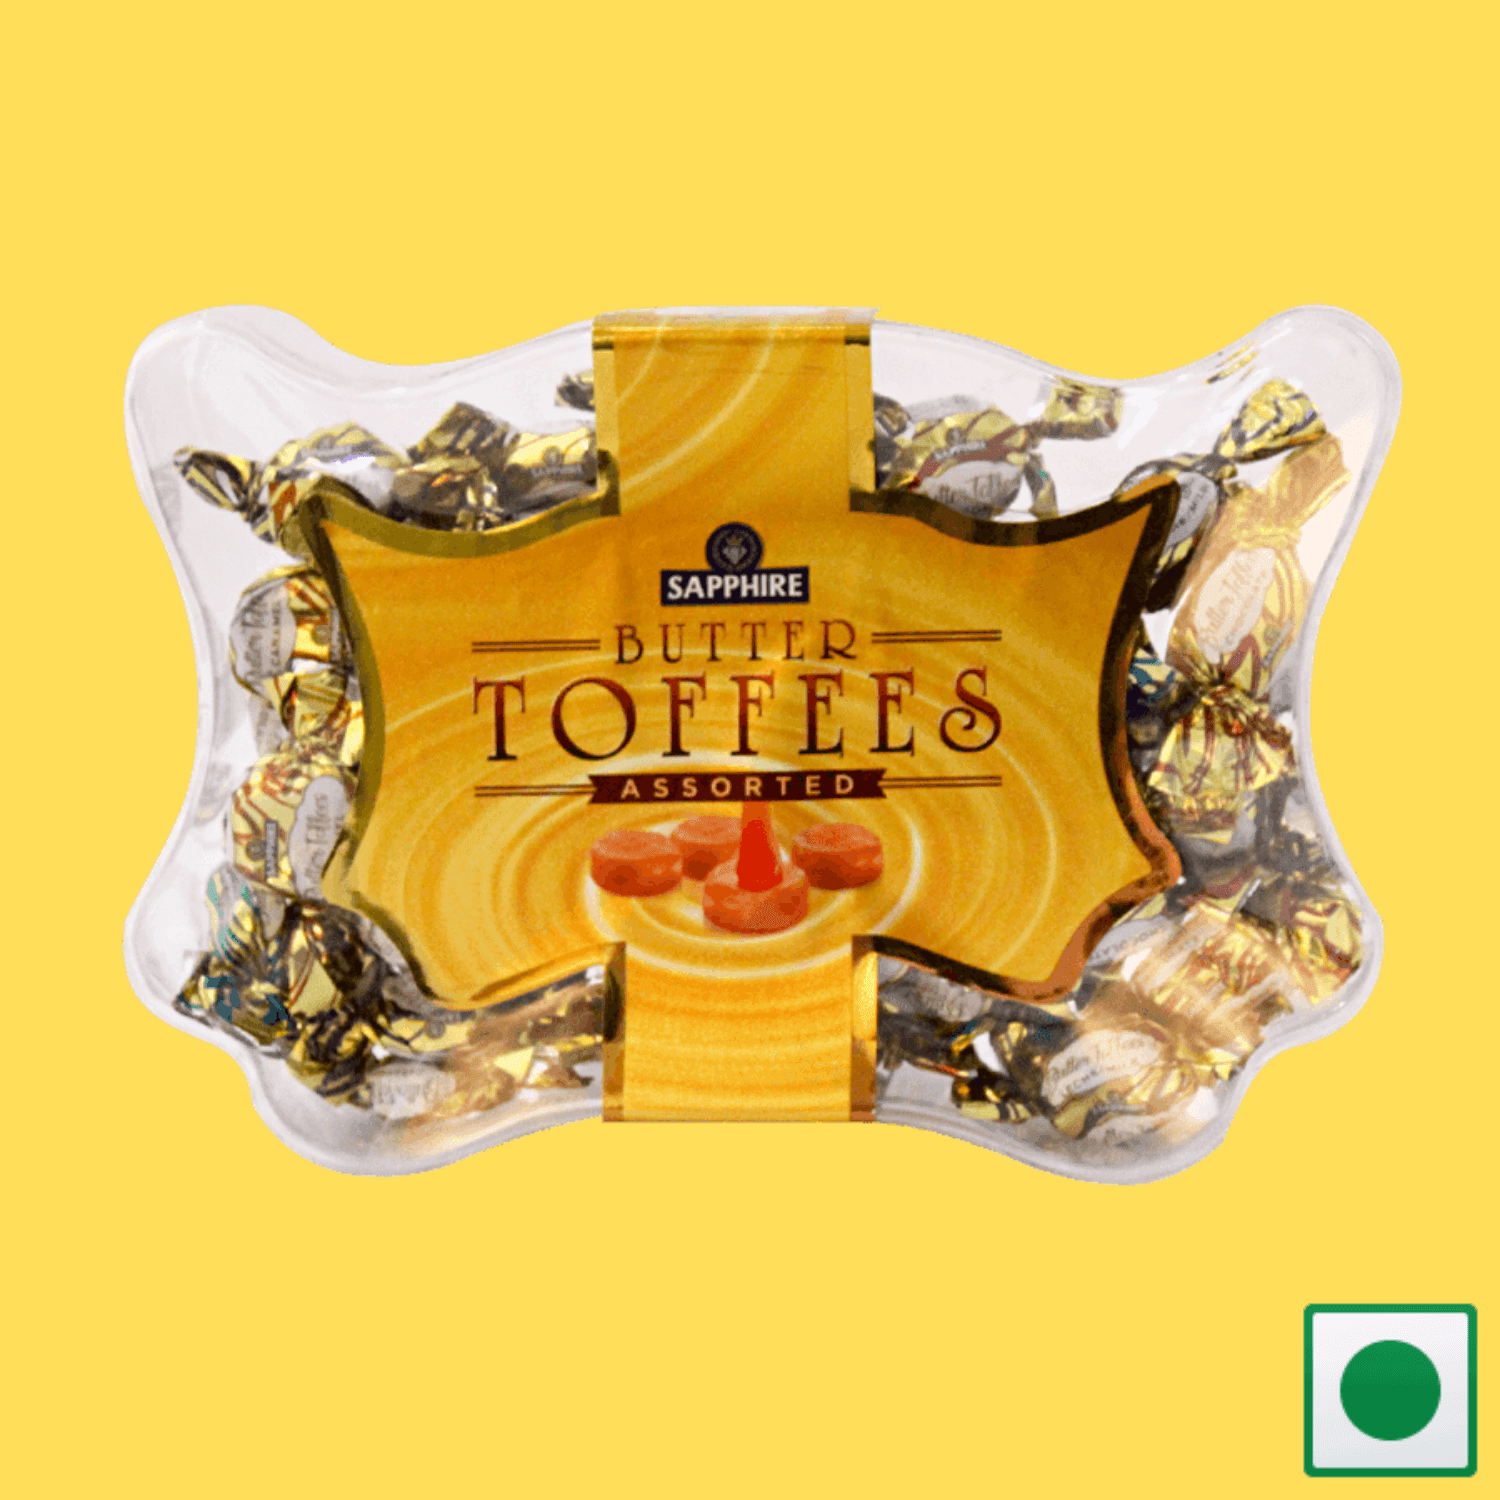 SAPPHIRE BUTTER TOFFEES ASSORTED 325G (Imported) - Super 7 Mart